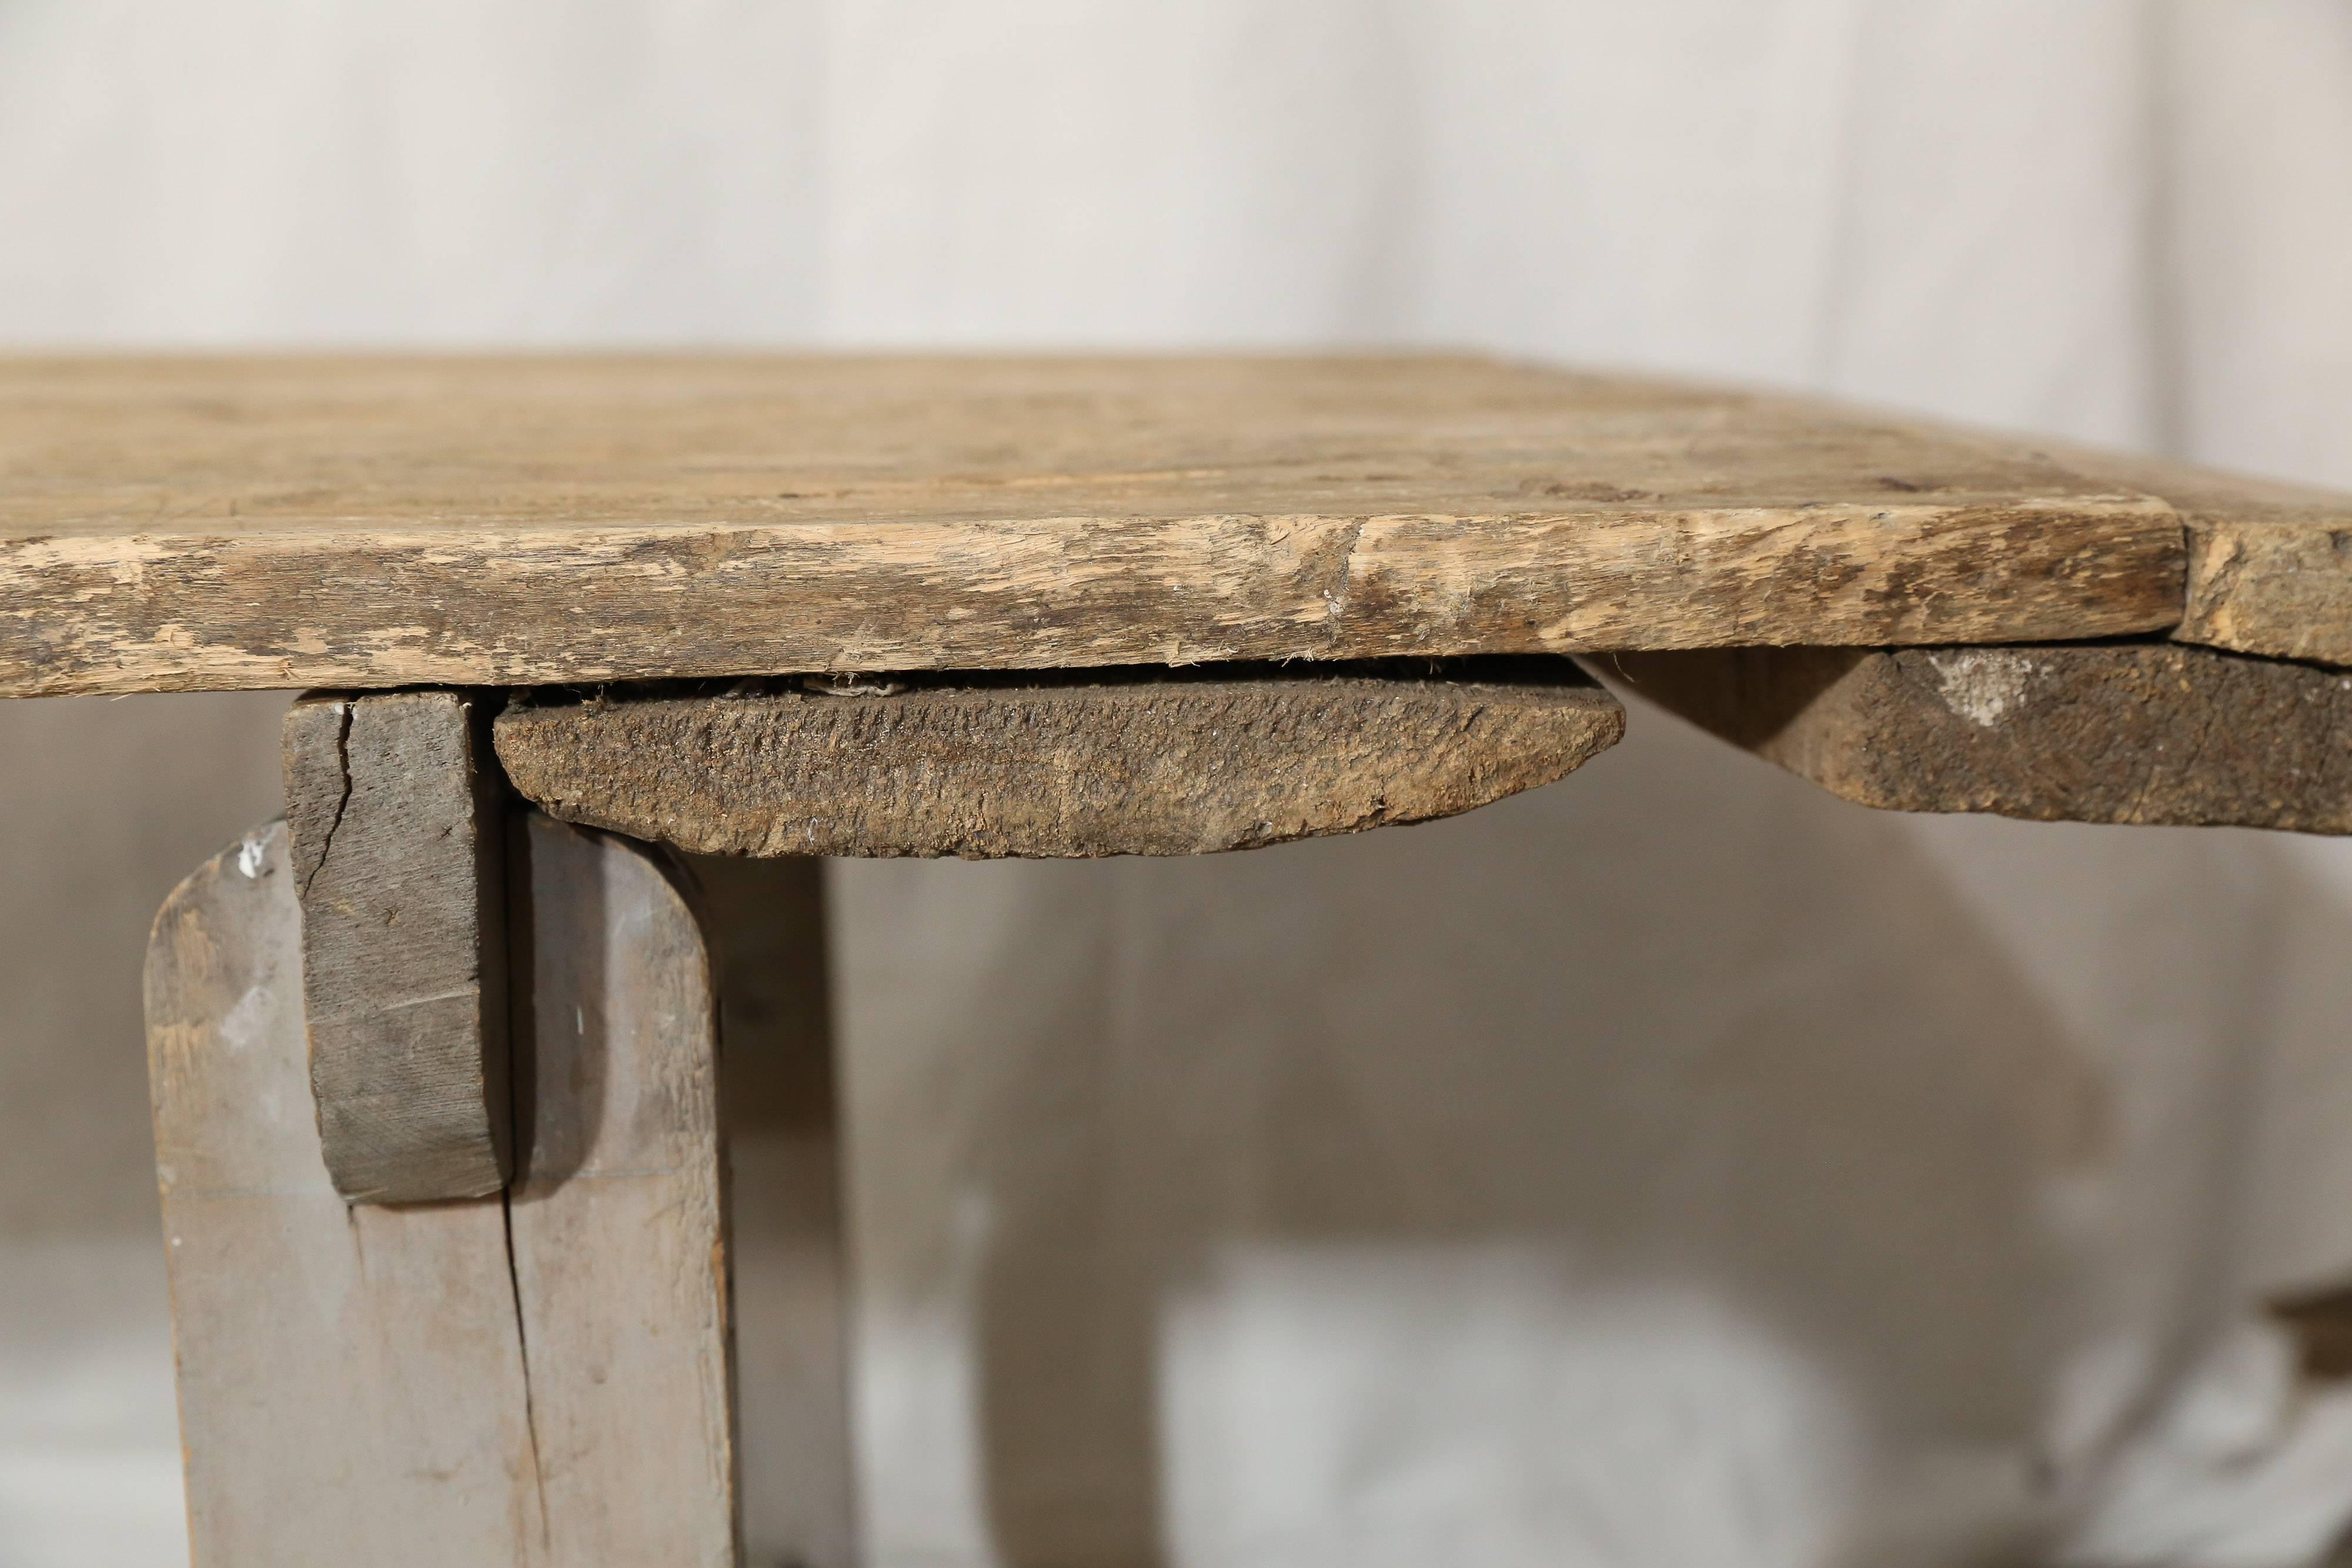 Rustic wood table with sawhorse legs. The wood varies in color and texture. Found in Provence.